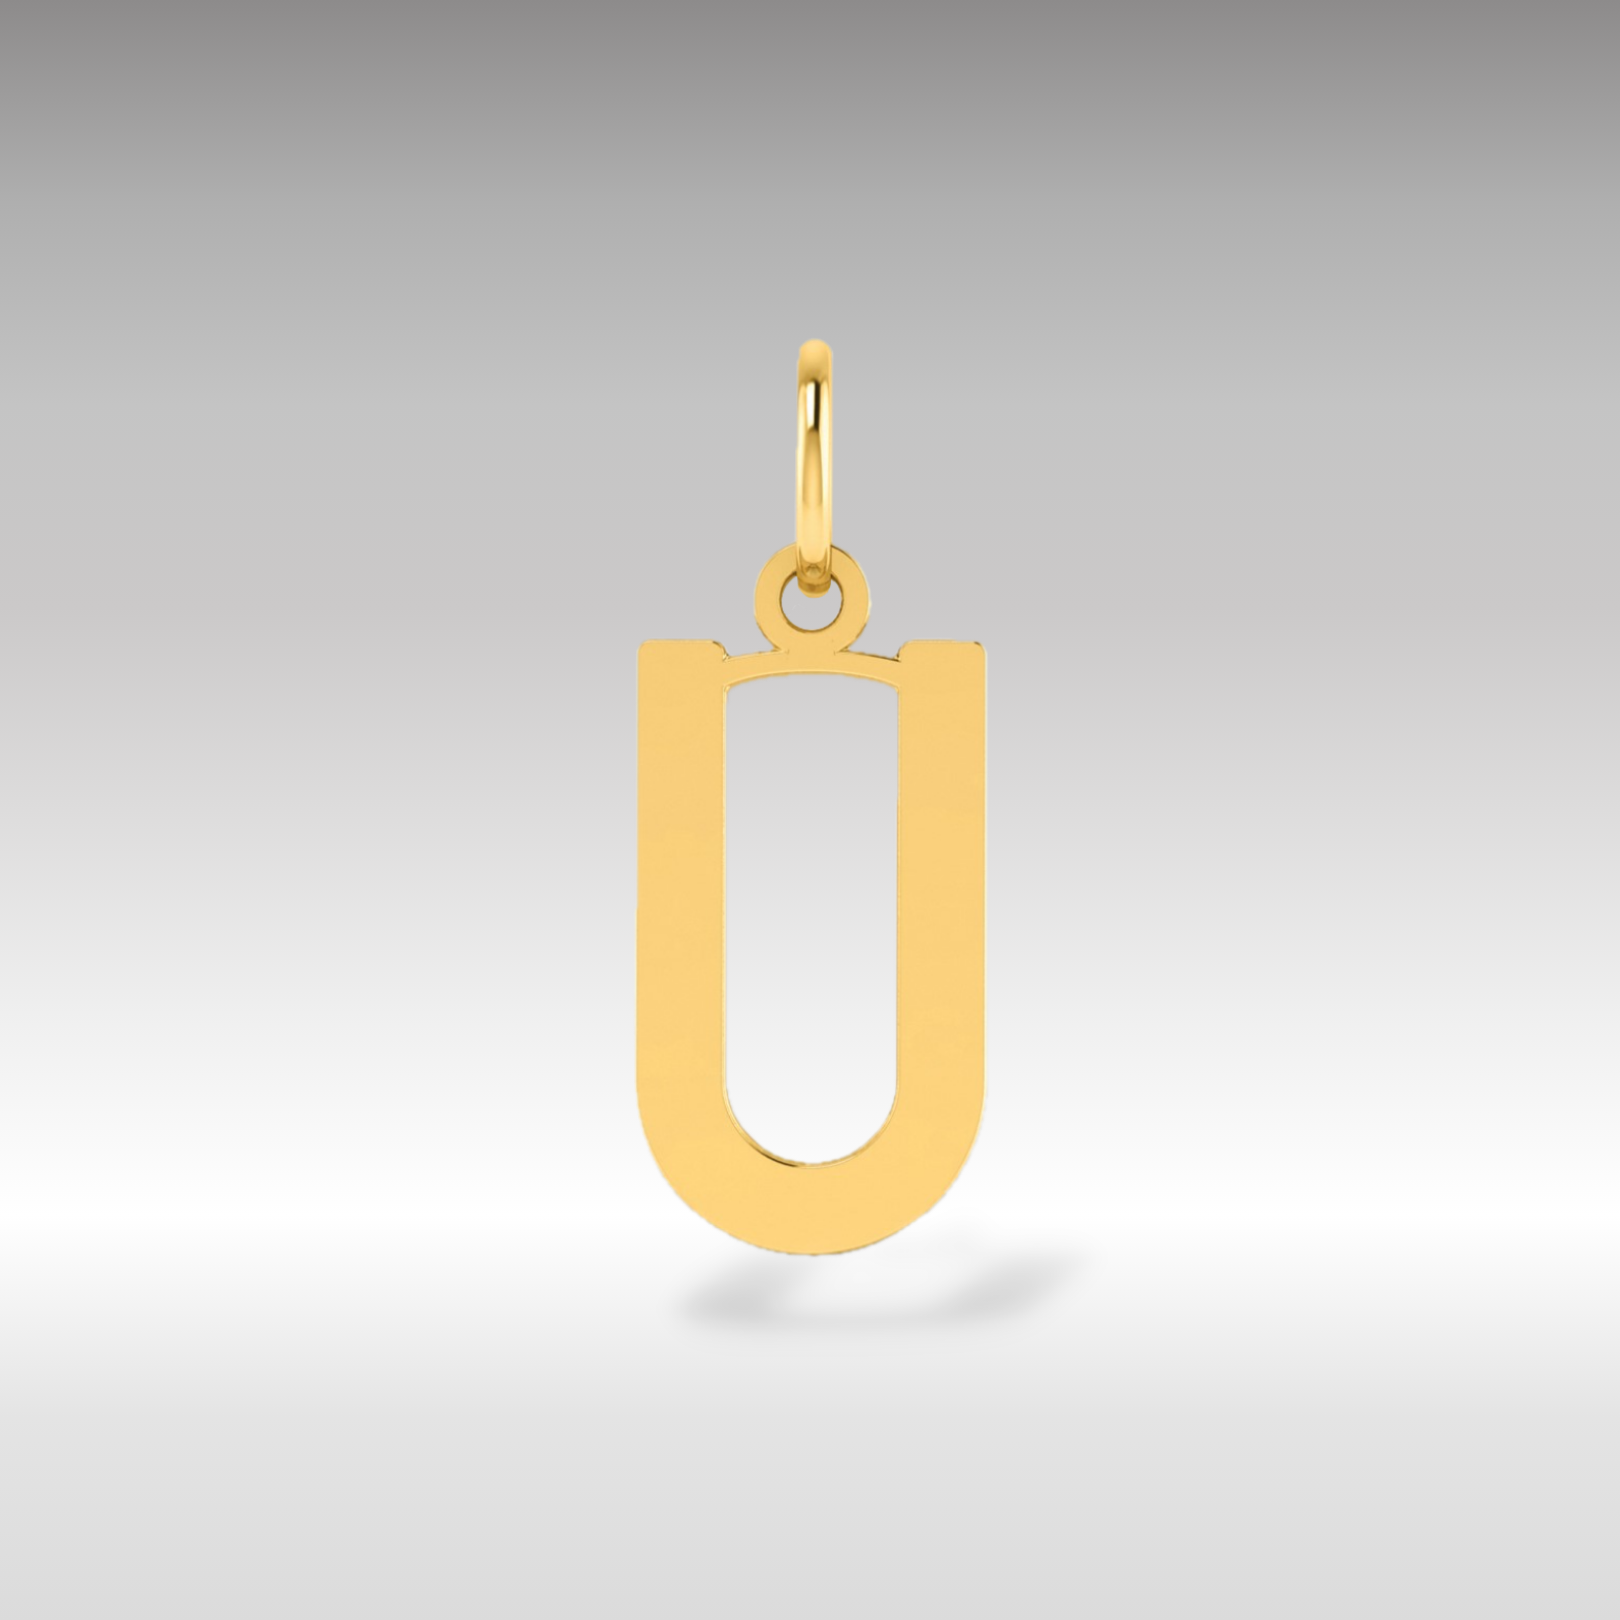 14K Gold Letter "U" Initial Pendant - Charlie & Co. Jewelry